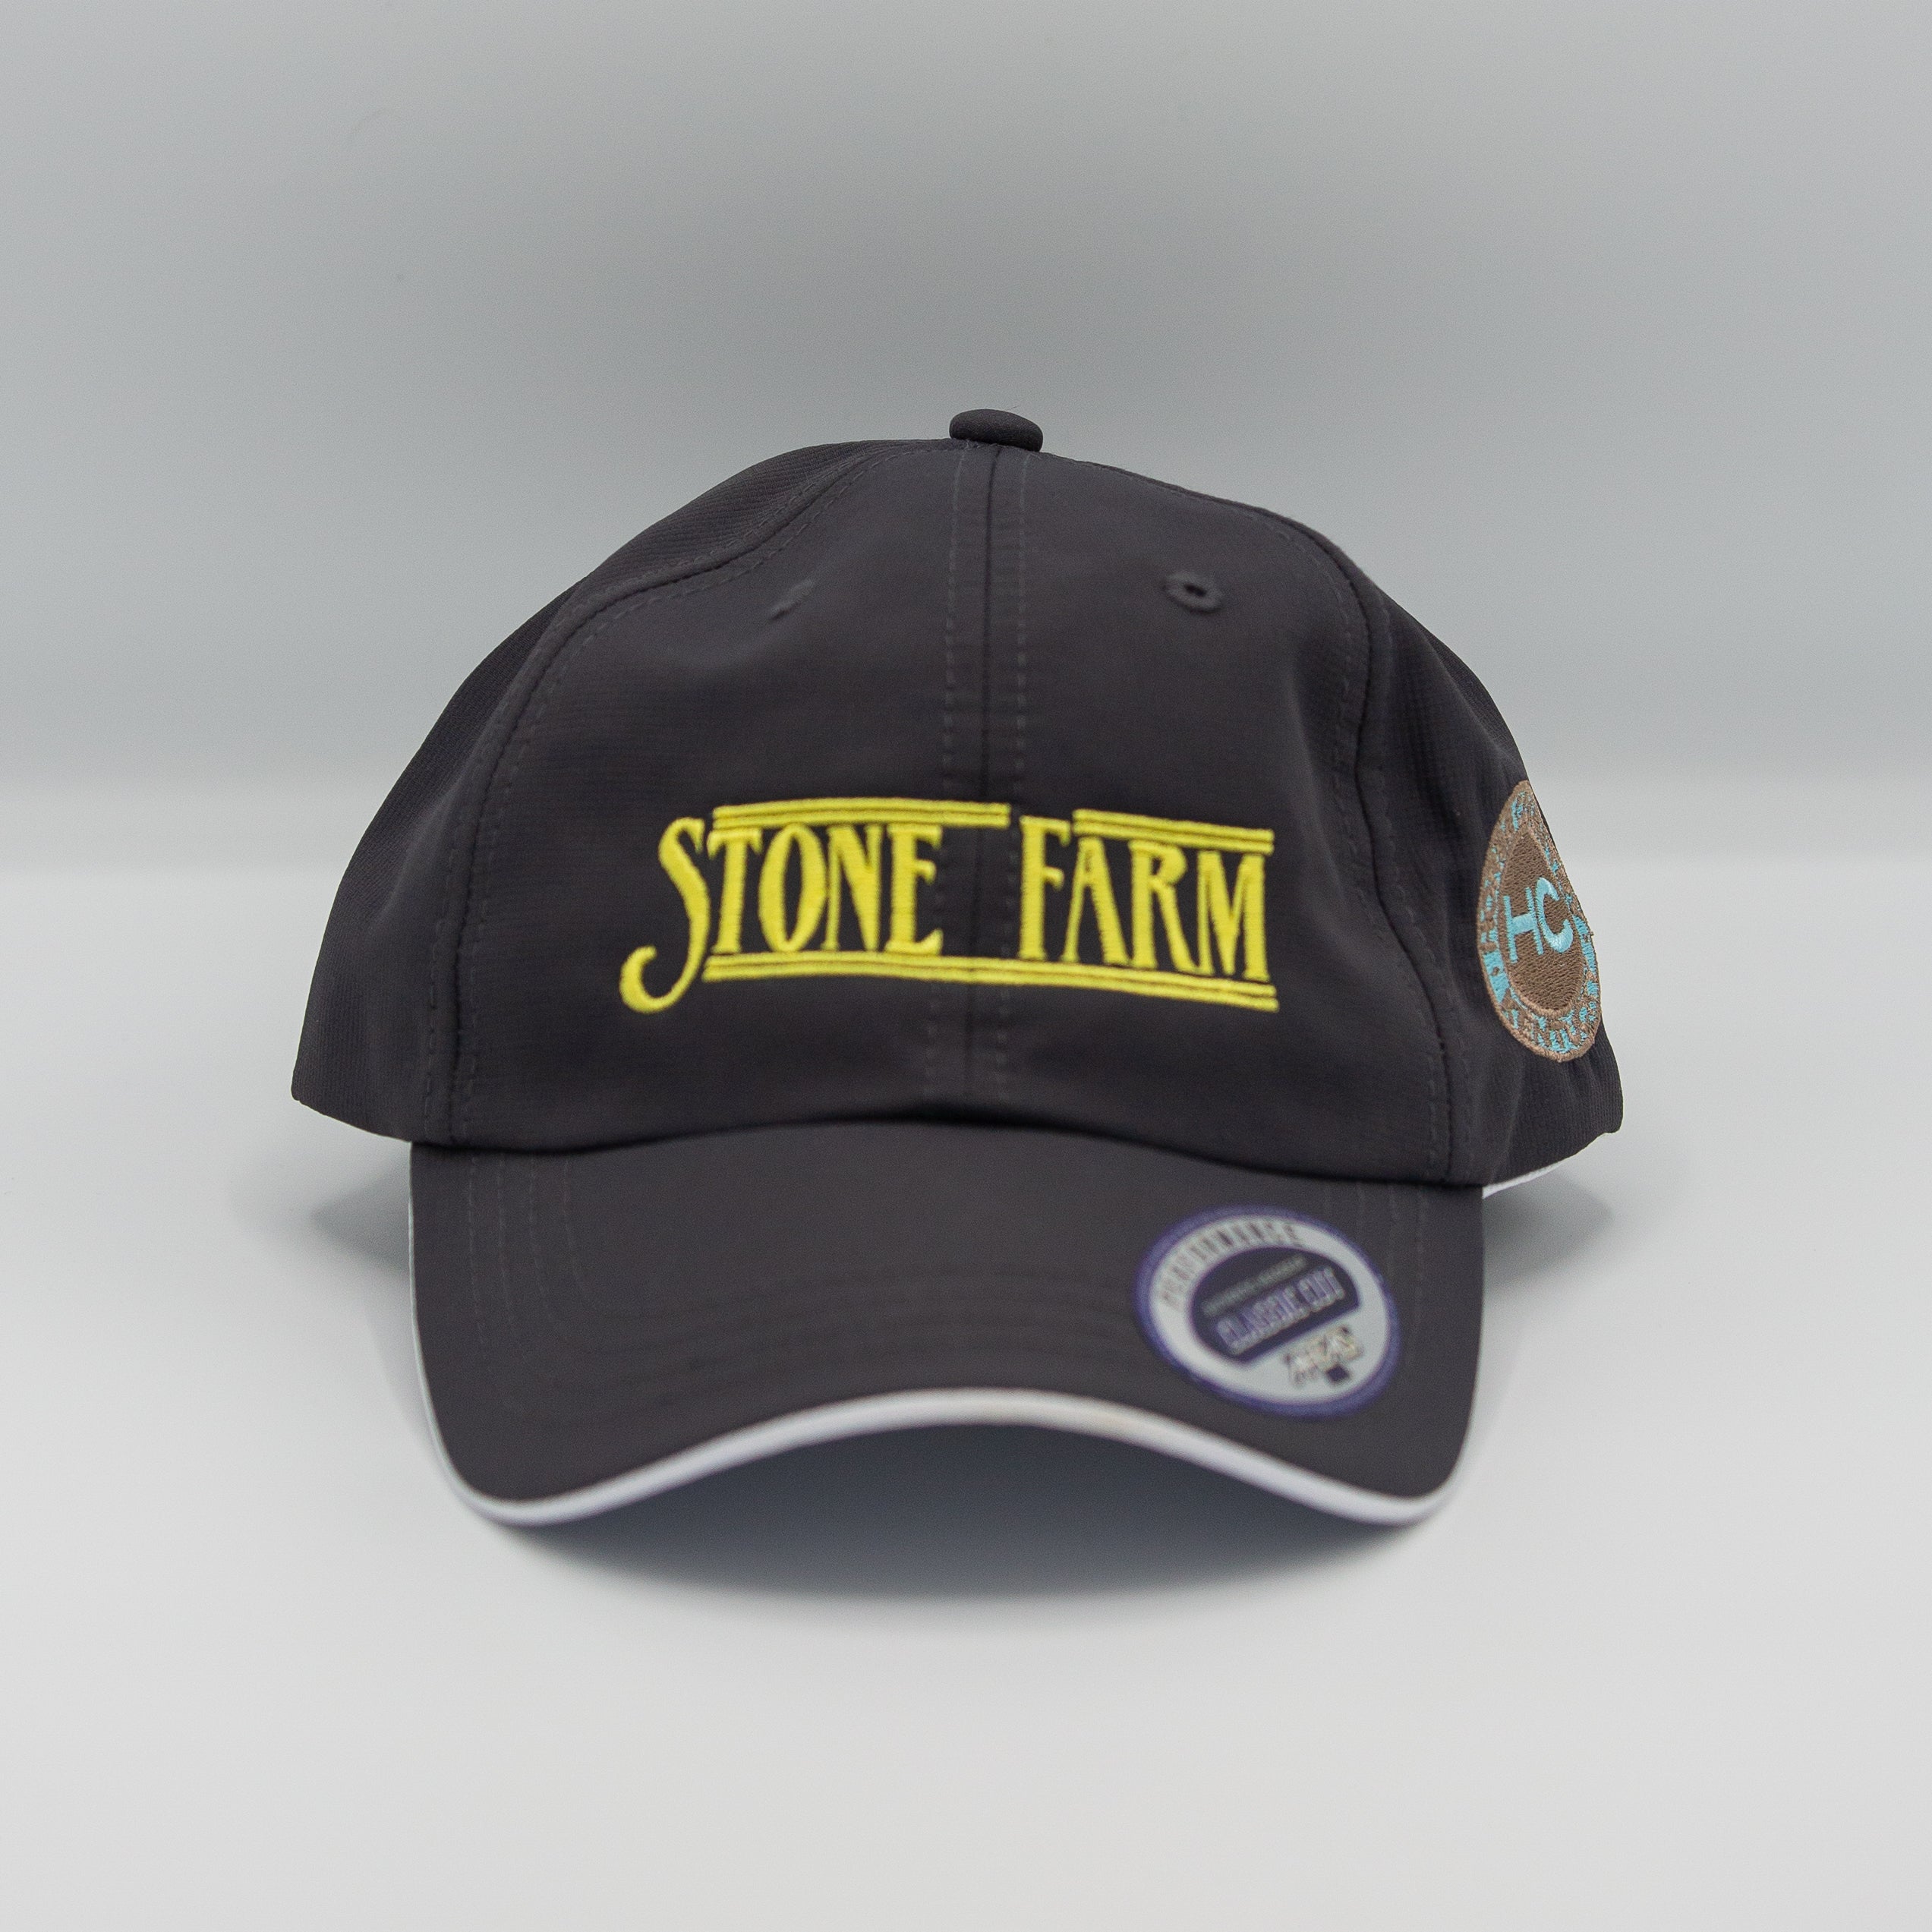 Stone Farm Horse Country hat